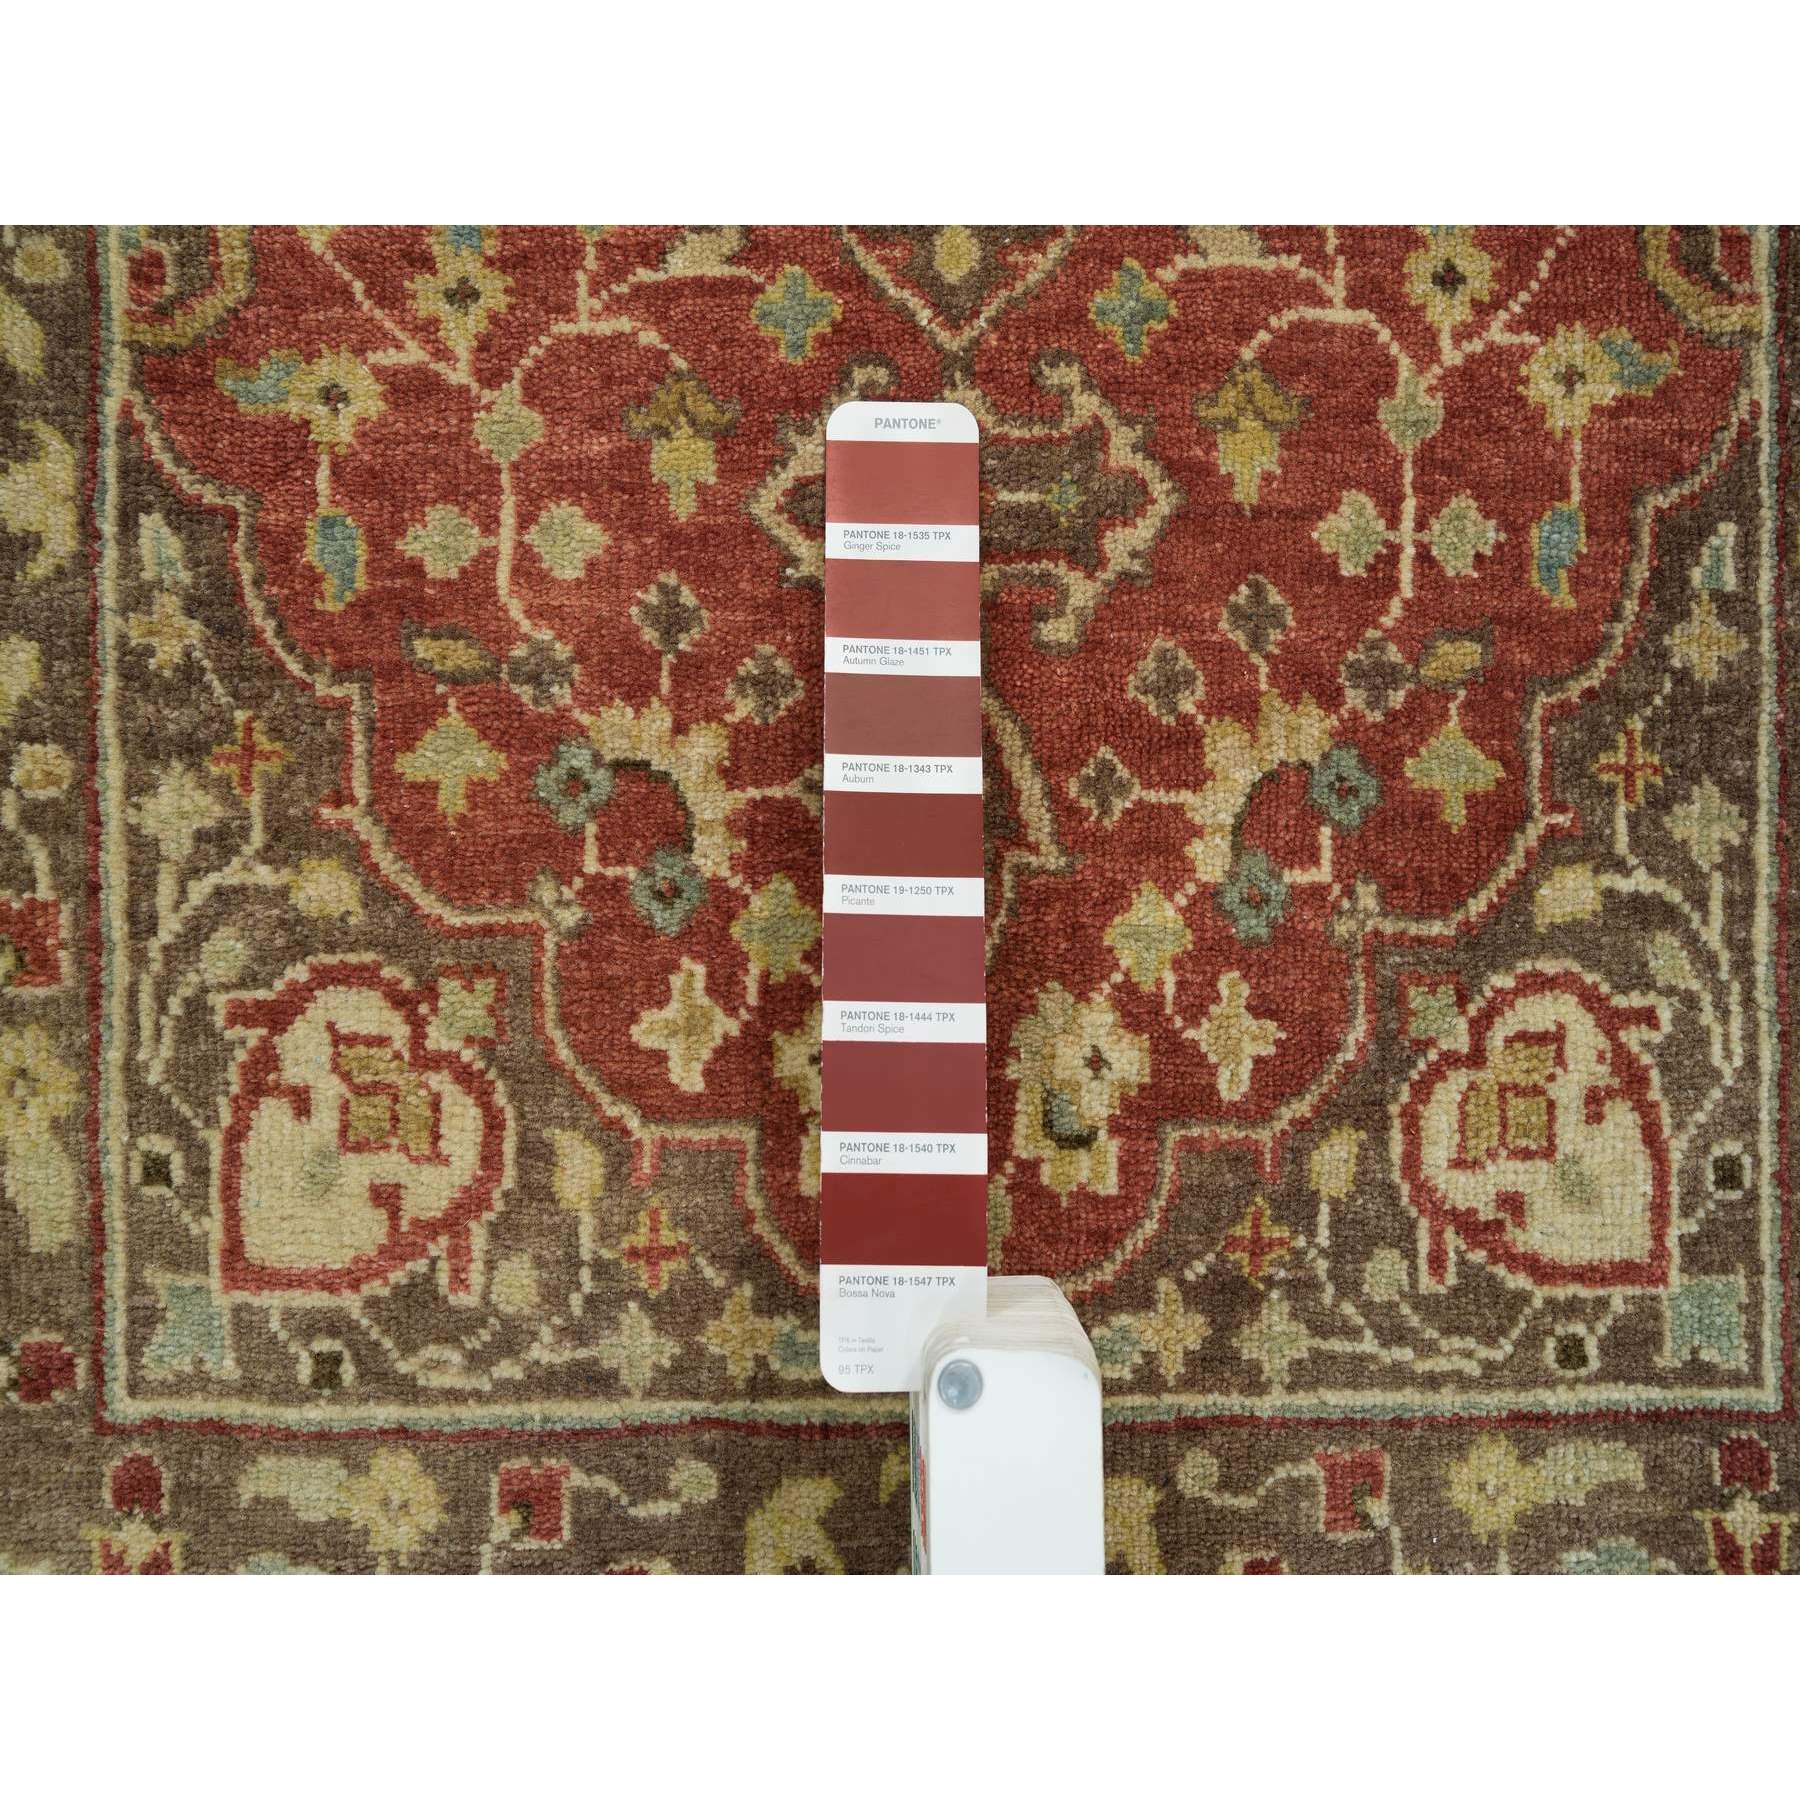  Wool Hand-Knotted Area Rug 2'6